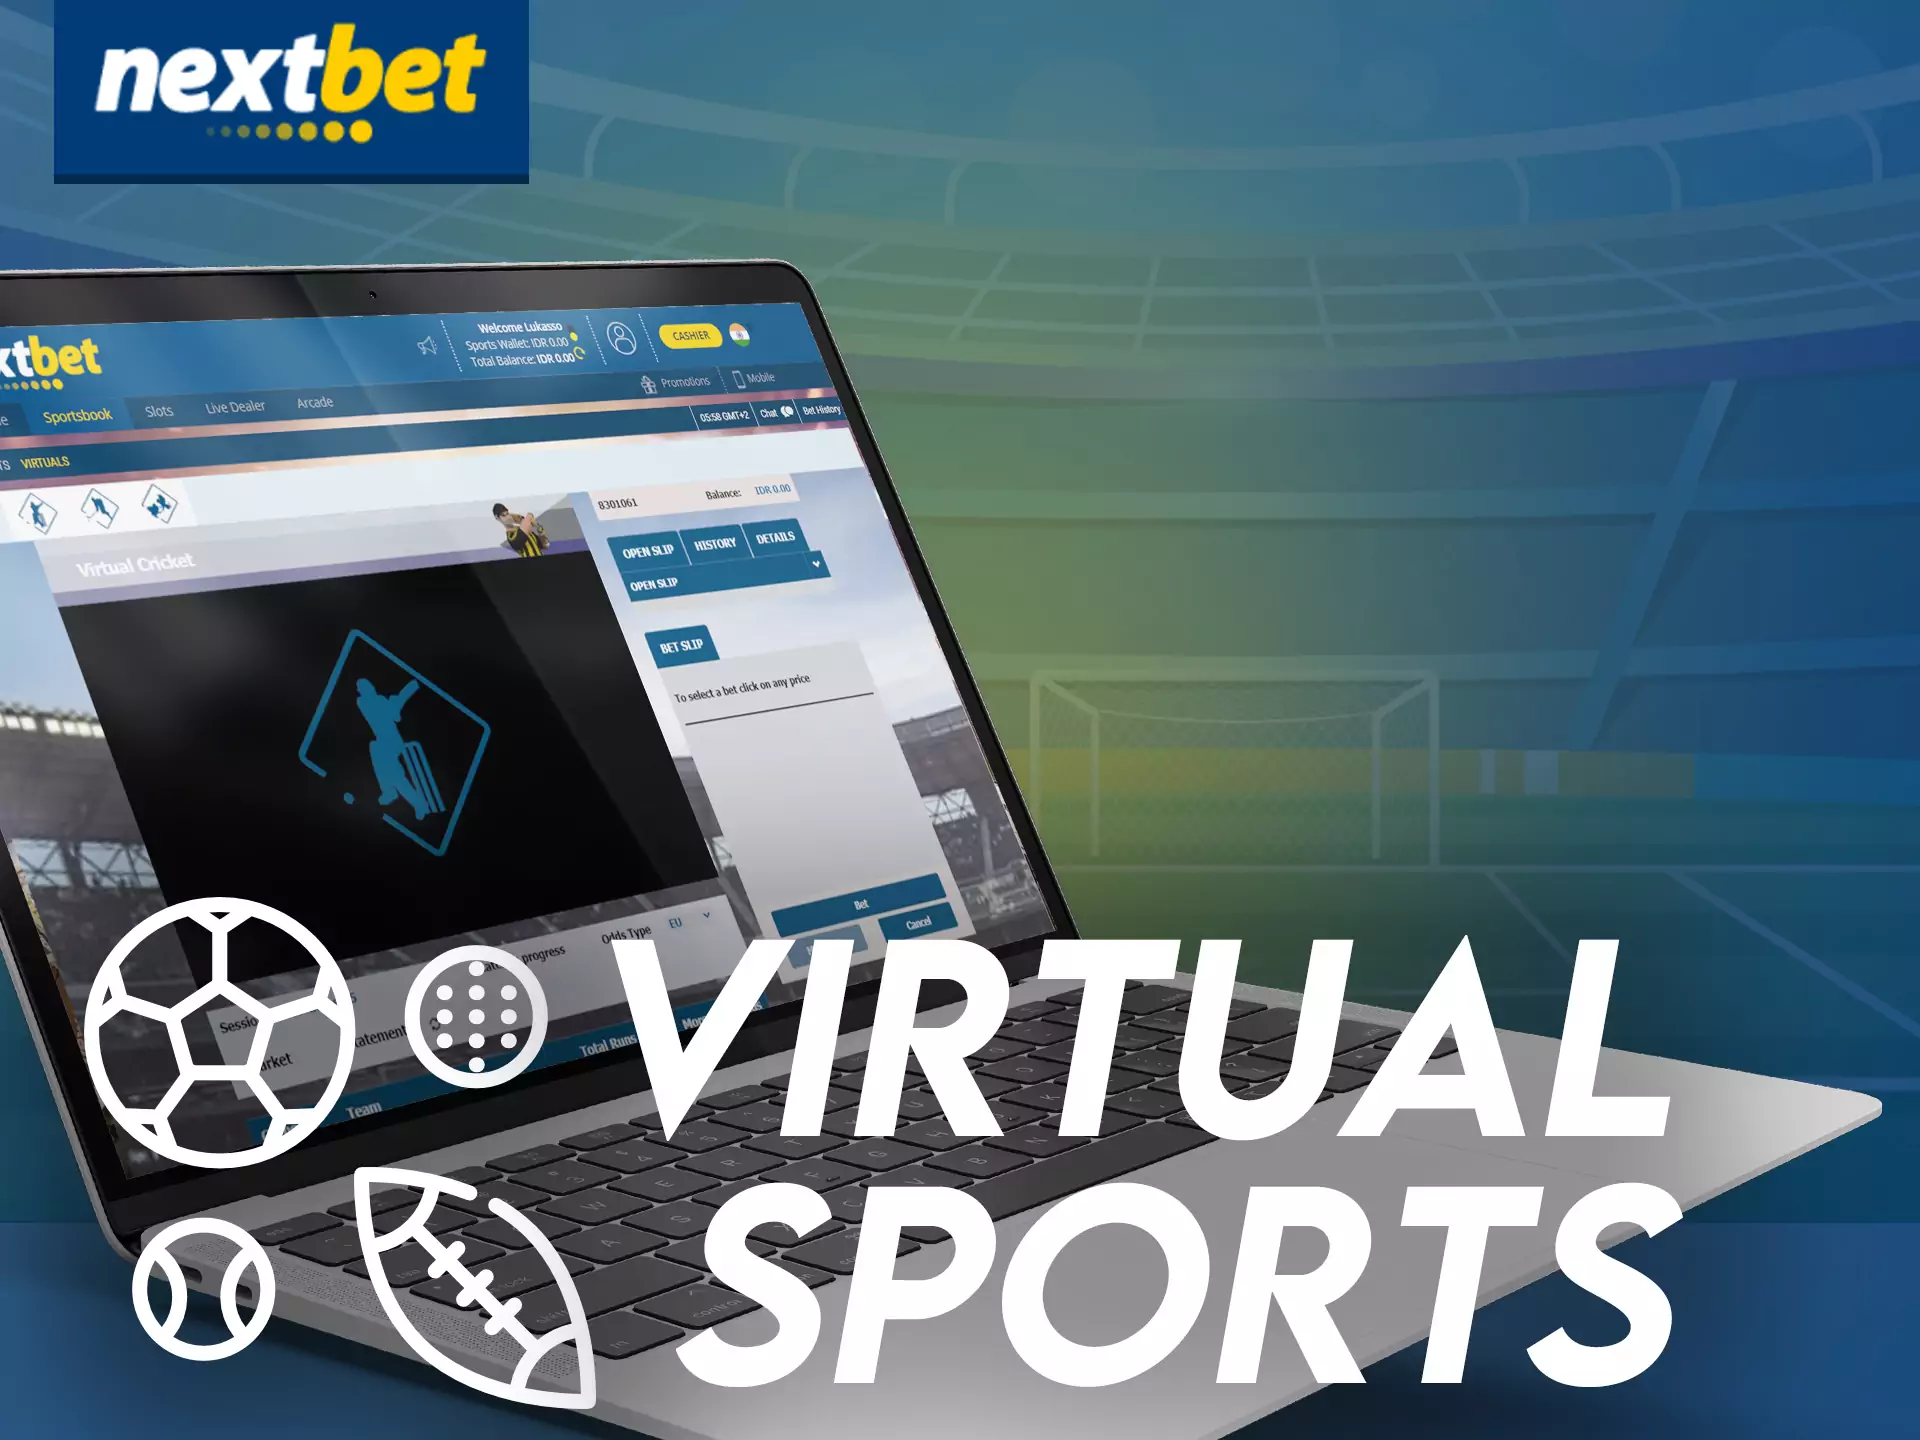 In Nextbet, place bets on virtual sports and win.